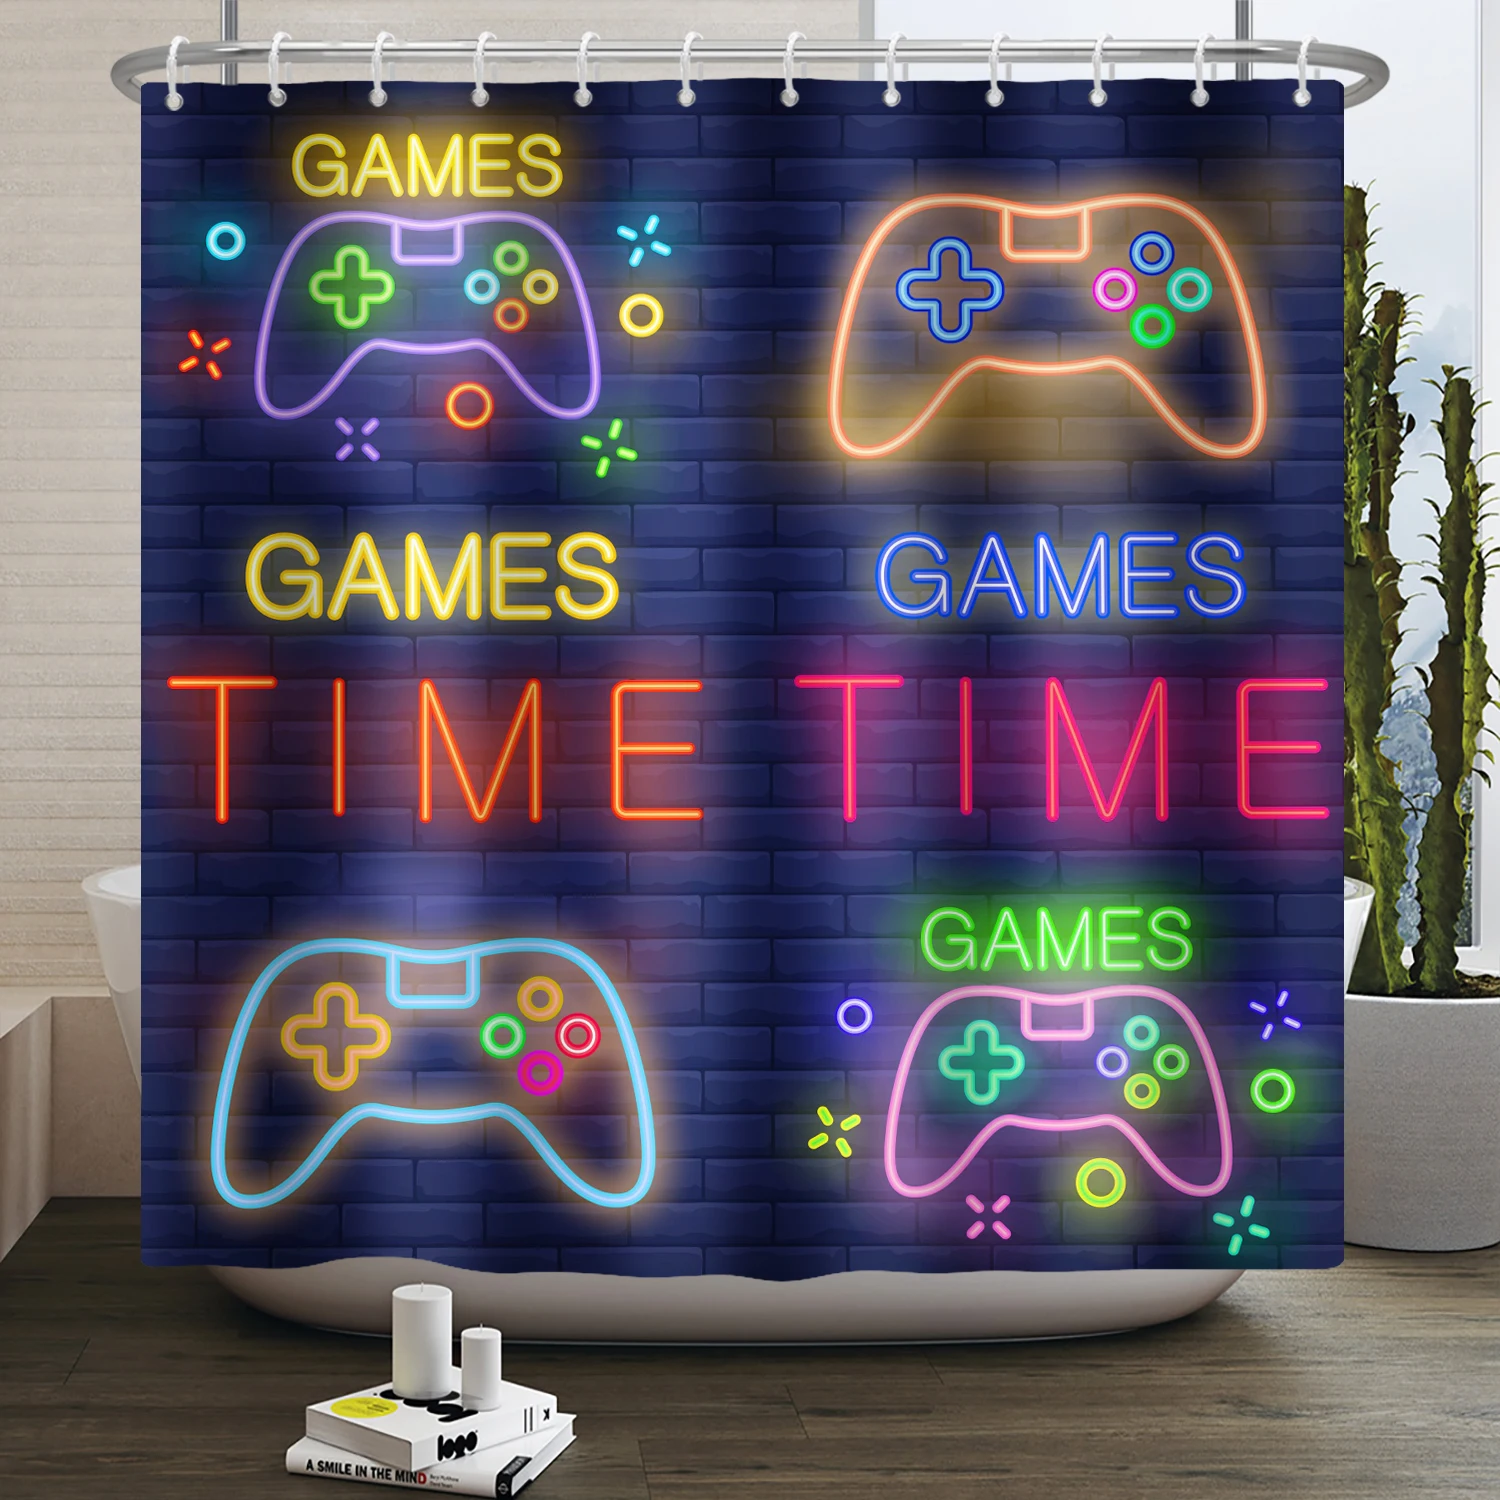 Games Time Shower Curtains Waterproof Bath Curtain for Kids Boys Classic Videogames Controller Bathroom Home Decor with Hooks wk10 mini camera1080p smart home security ir night wireless mini camcorder surveillance wifi camera real time view kids cam toys